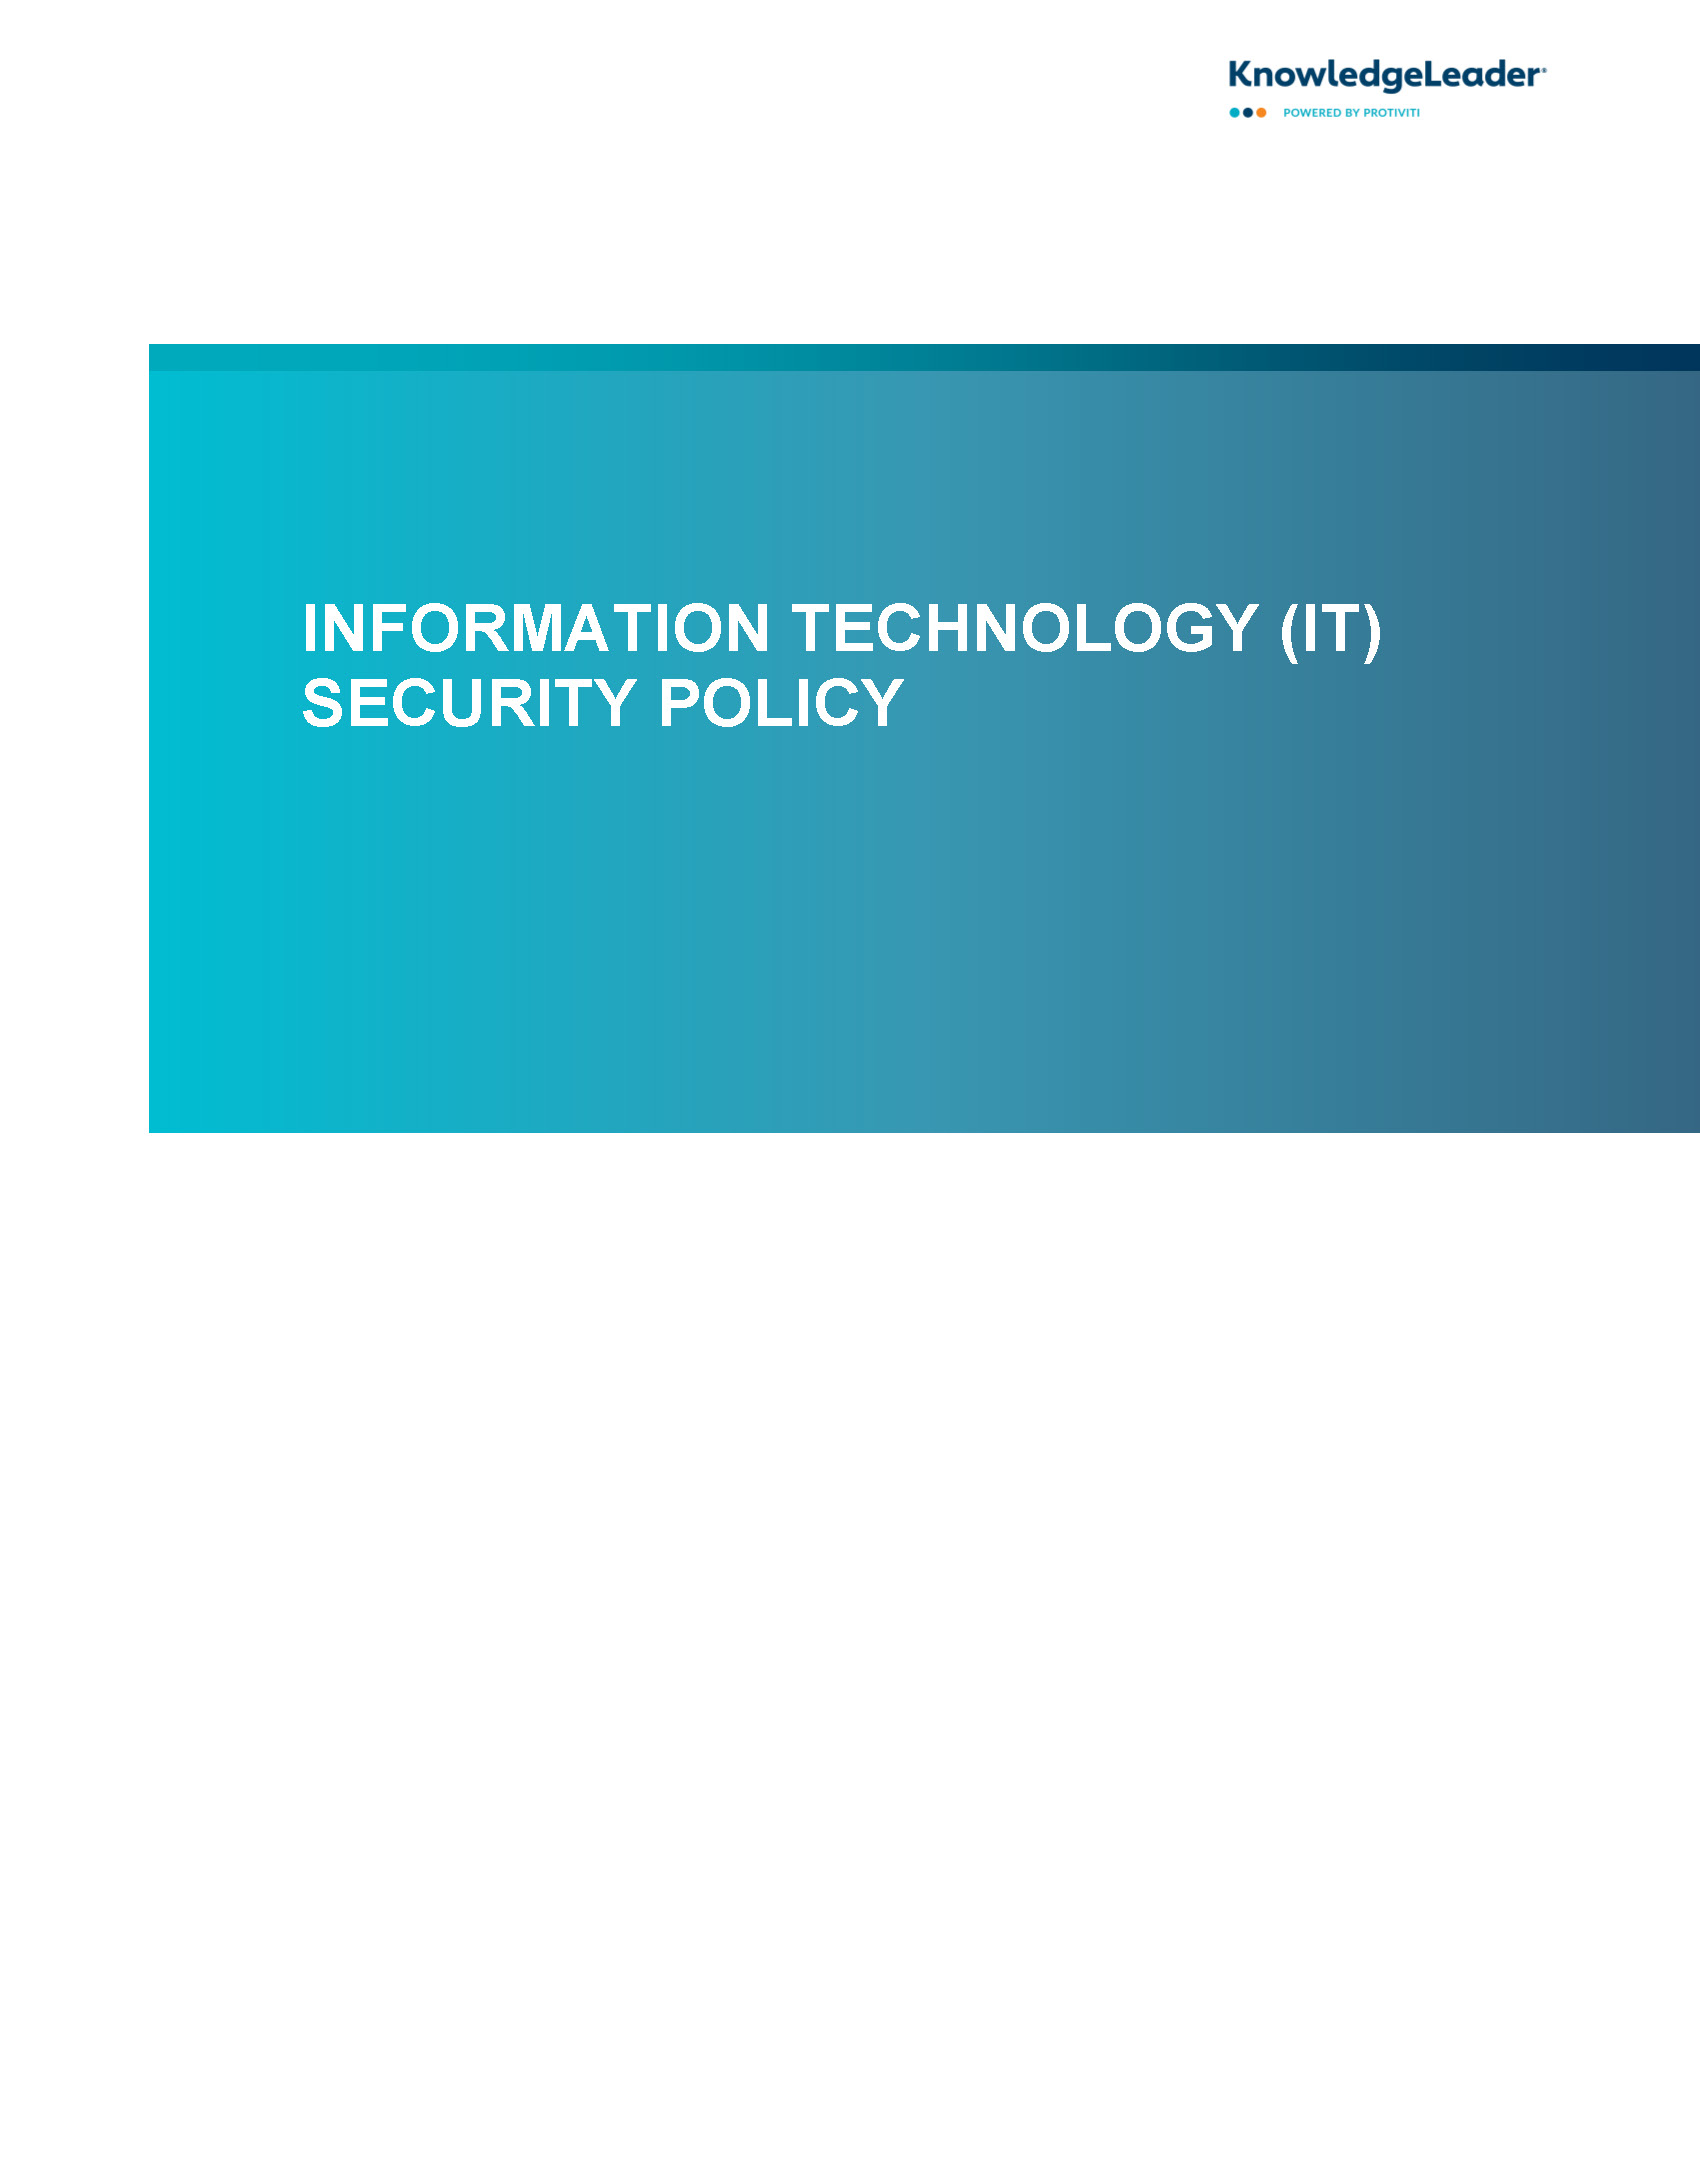 Screenshot of the first page of Information Technology (IT) Security Policy